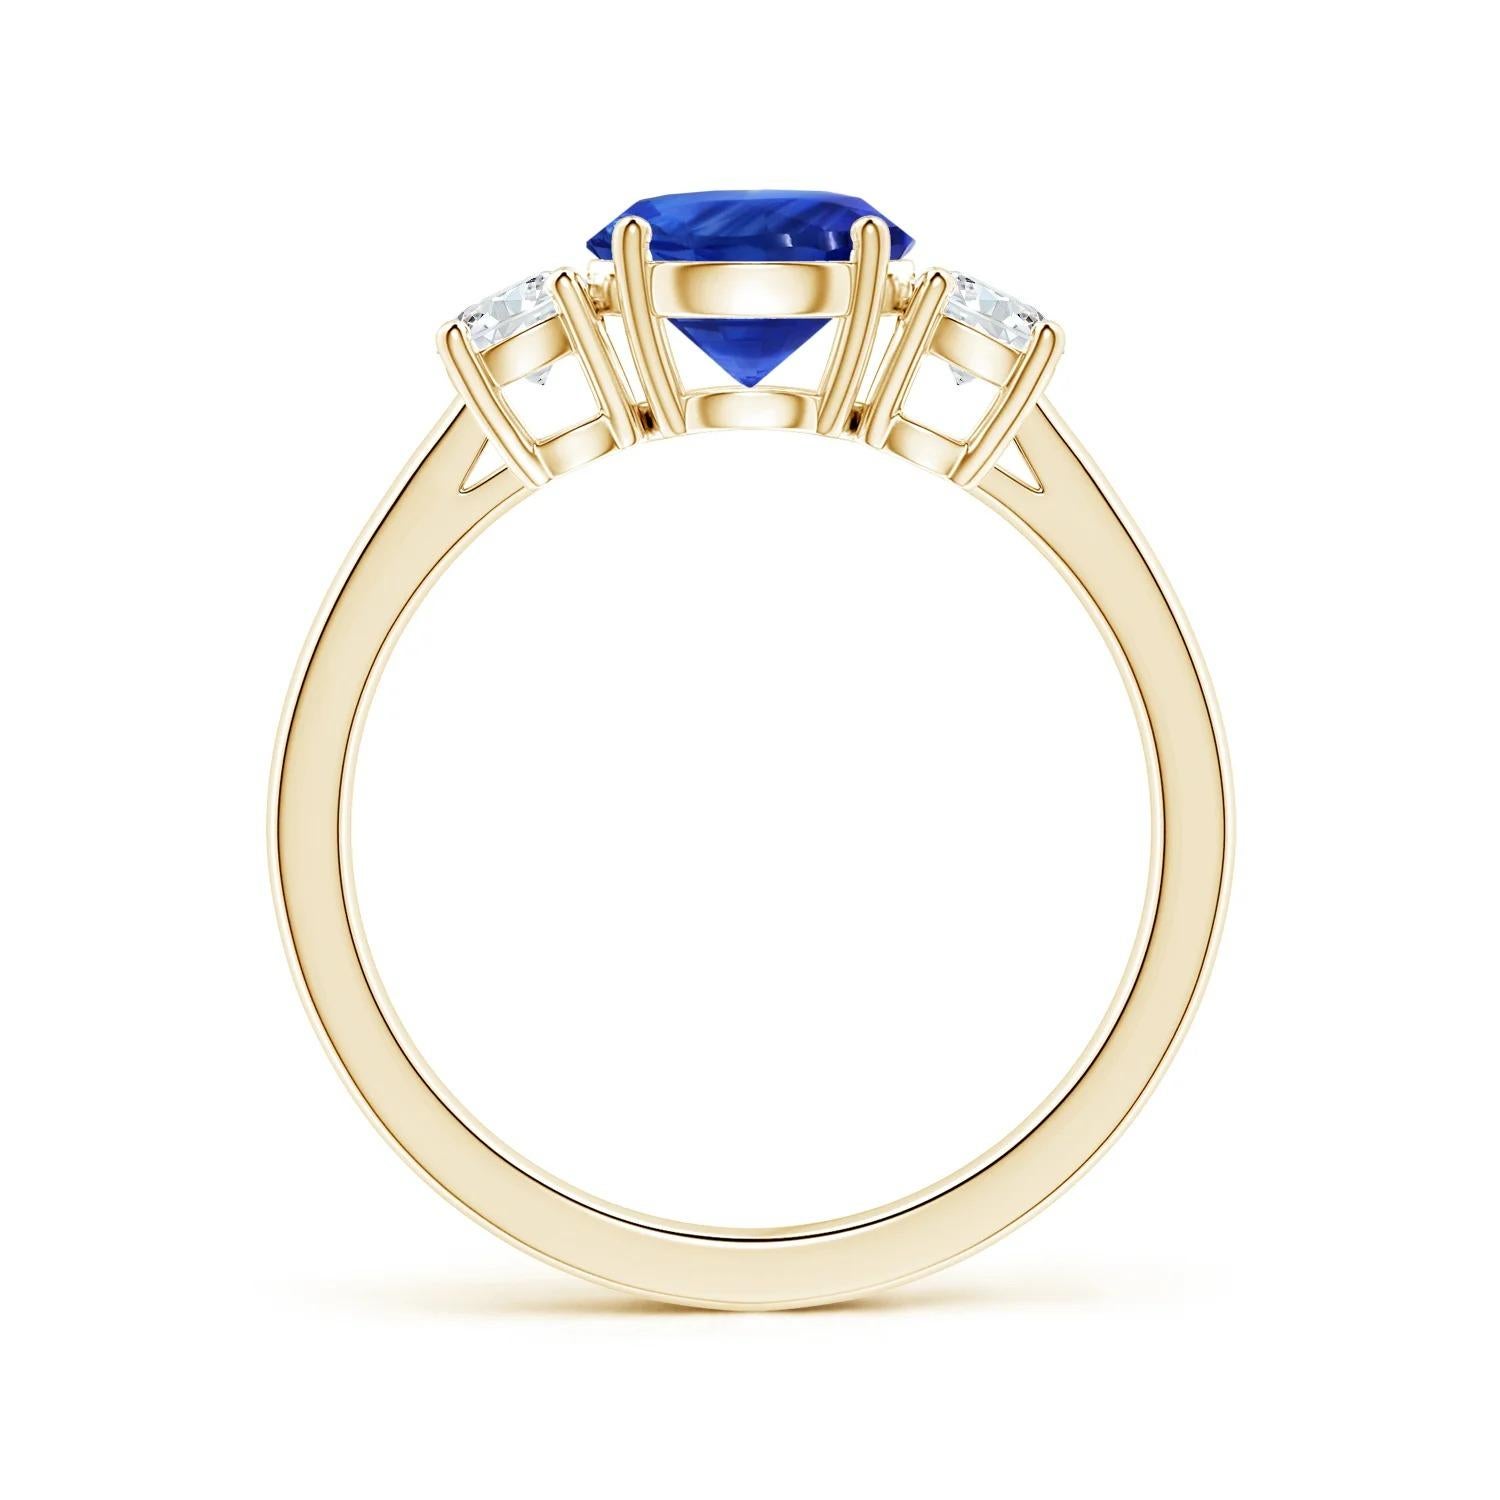 For Sale:  Angara Three Stone Gia Certified Blue Sapphire Ring in Yellow Gold with Diamonds 2